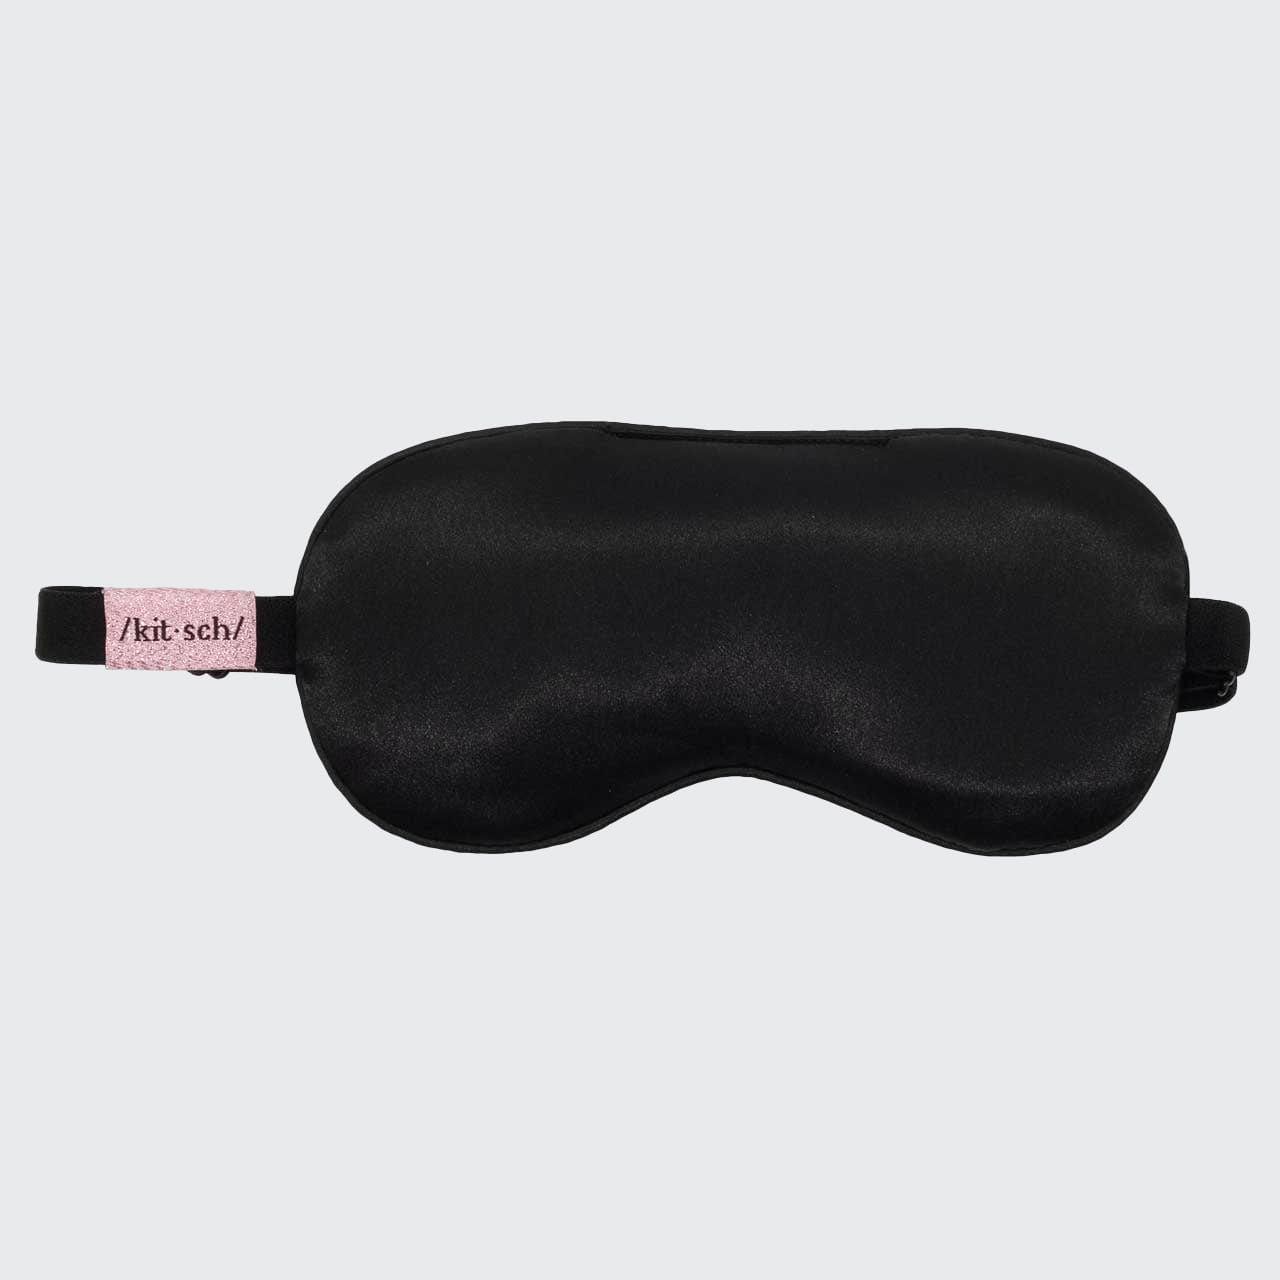 The Lavender Weighted Satin Eye Mask | Kitsch